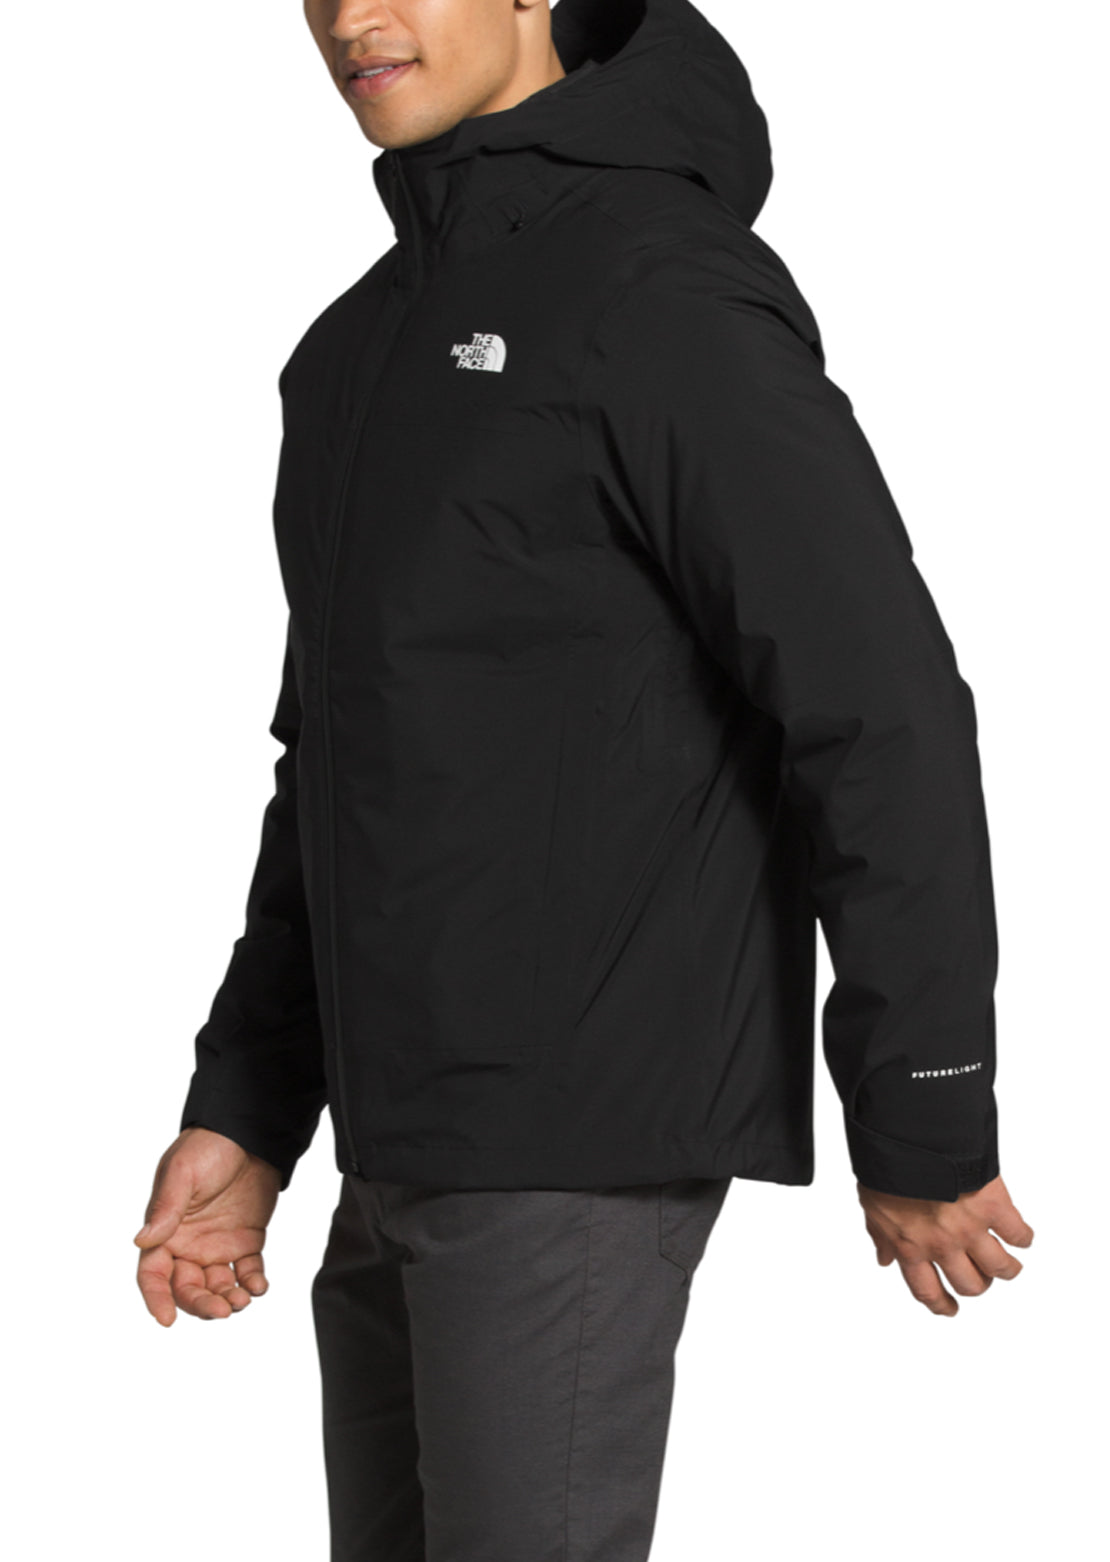 The North Face Men's Mountain Light FutureLight Triclimate Jacket